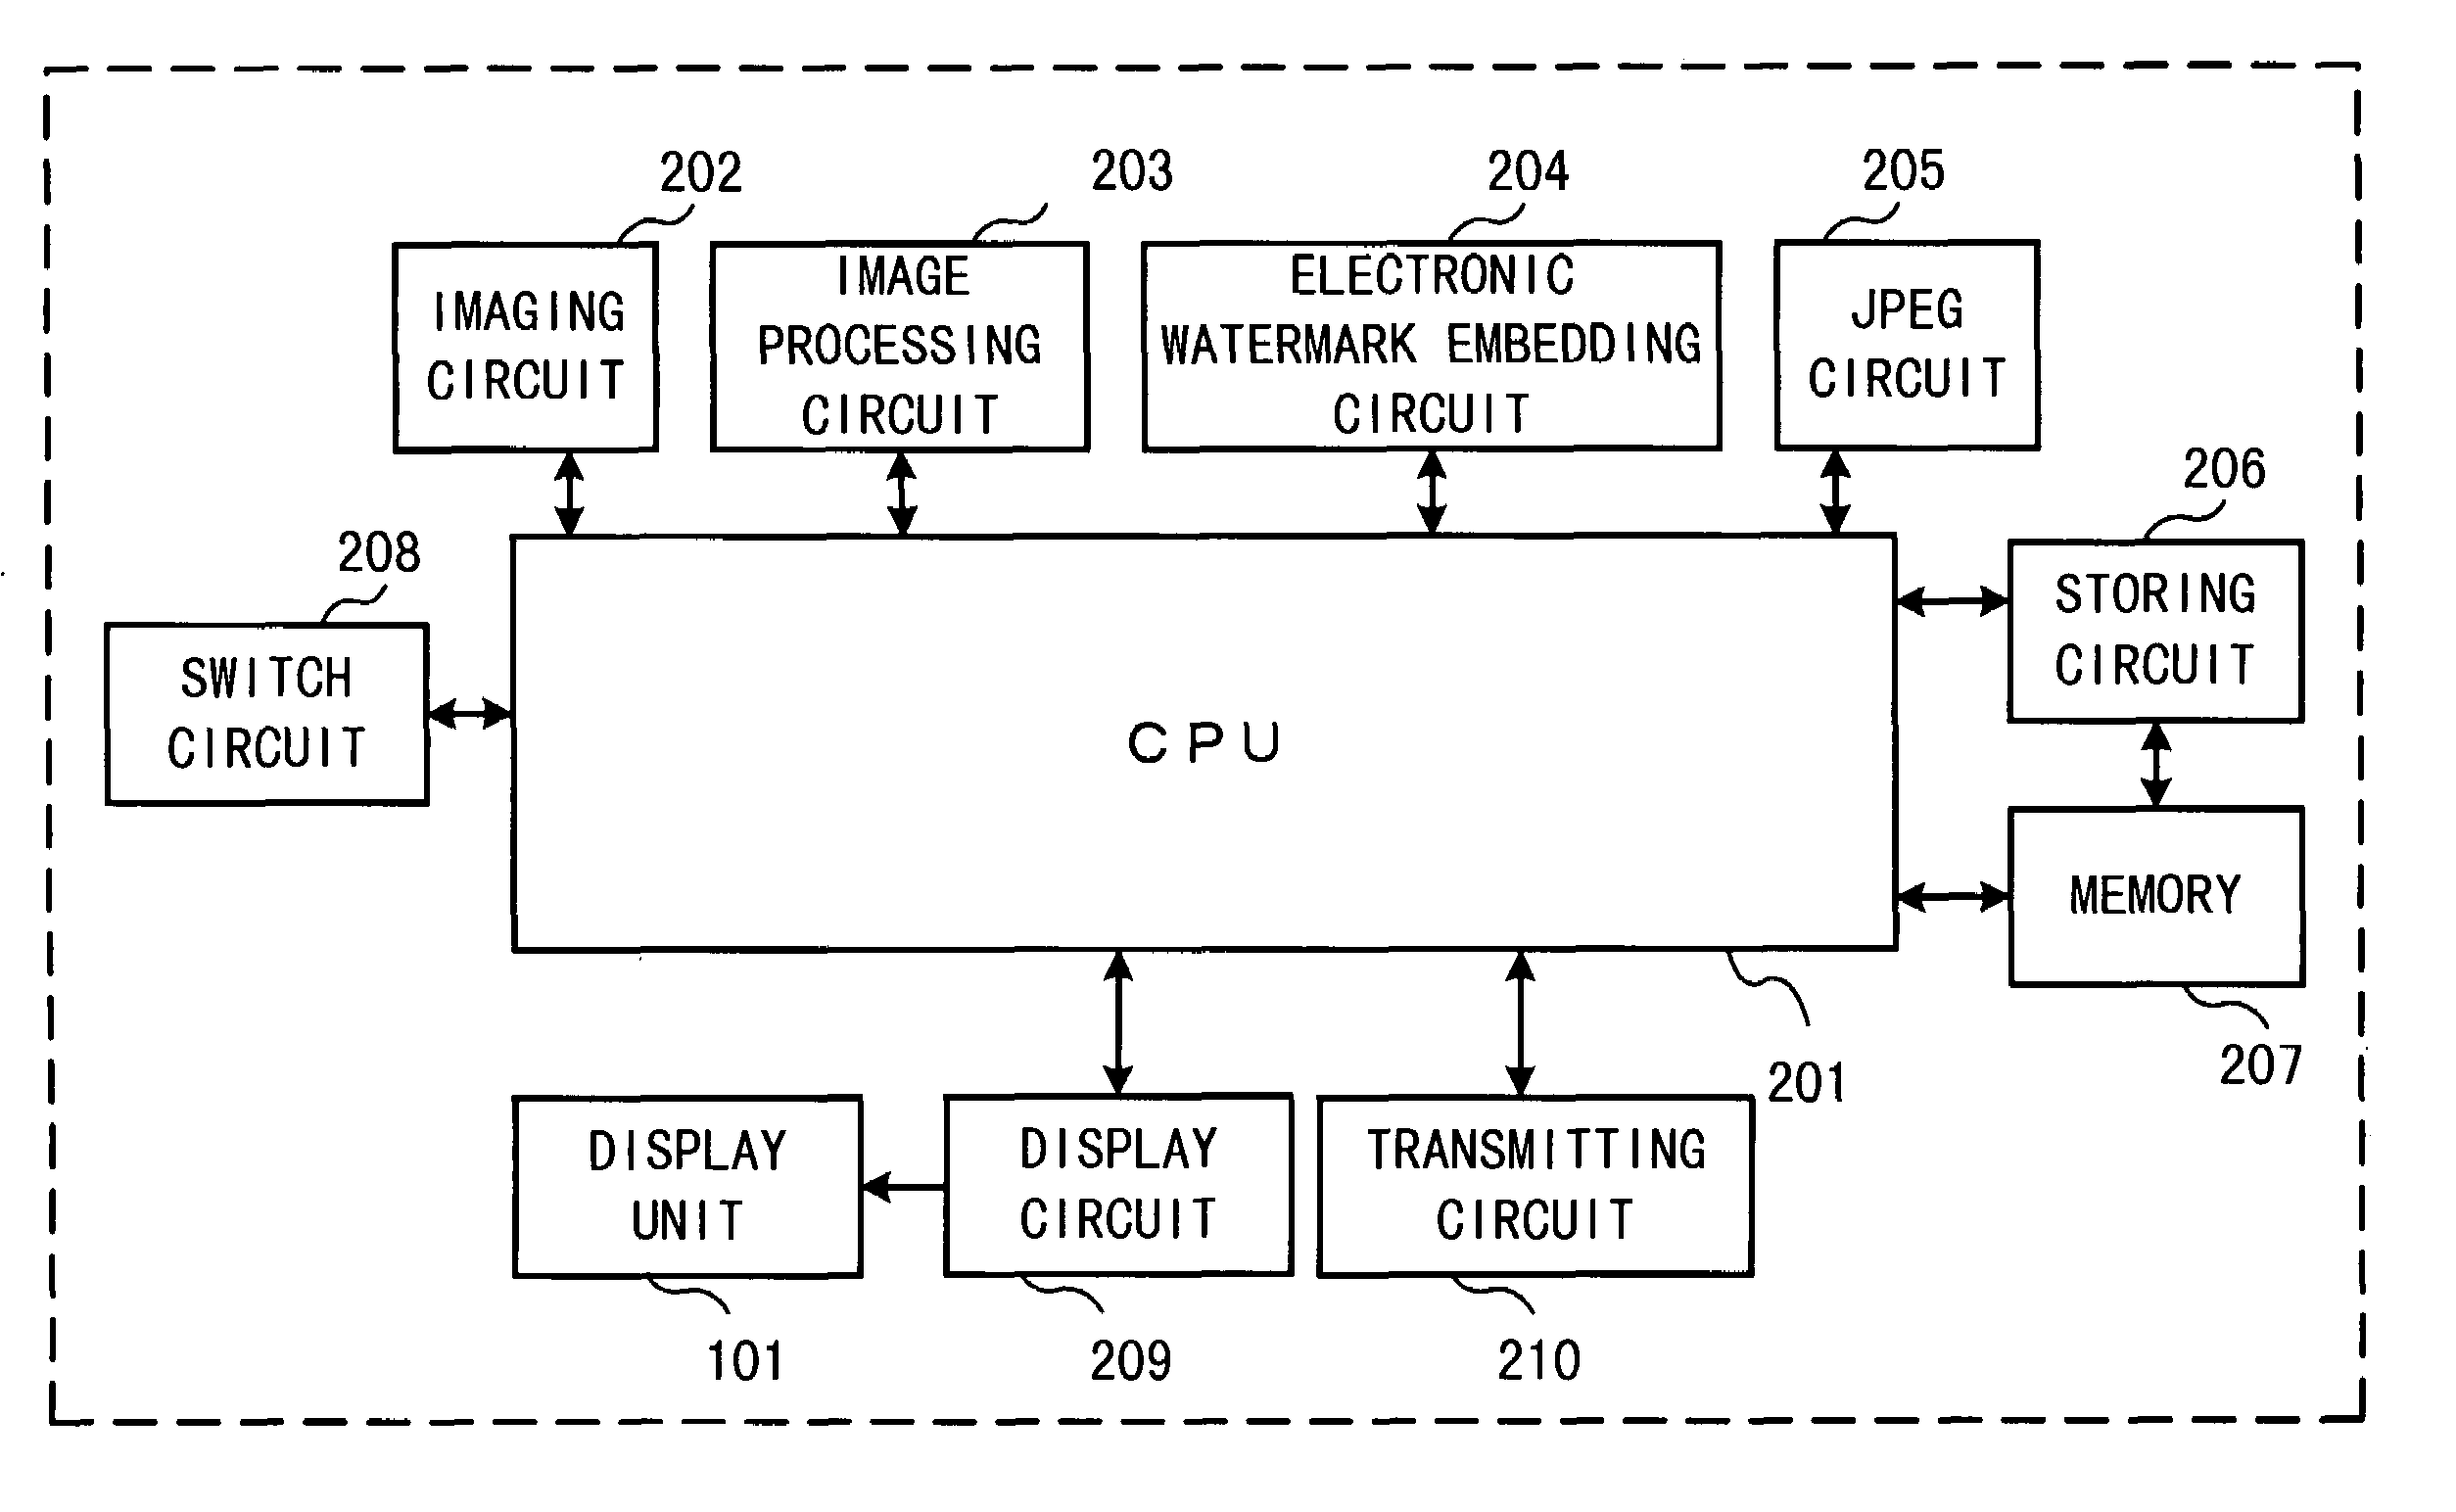 Digital camera capable of embedding an electronic watermark into image data